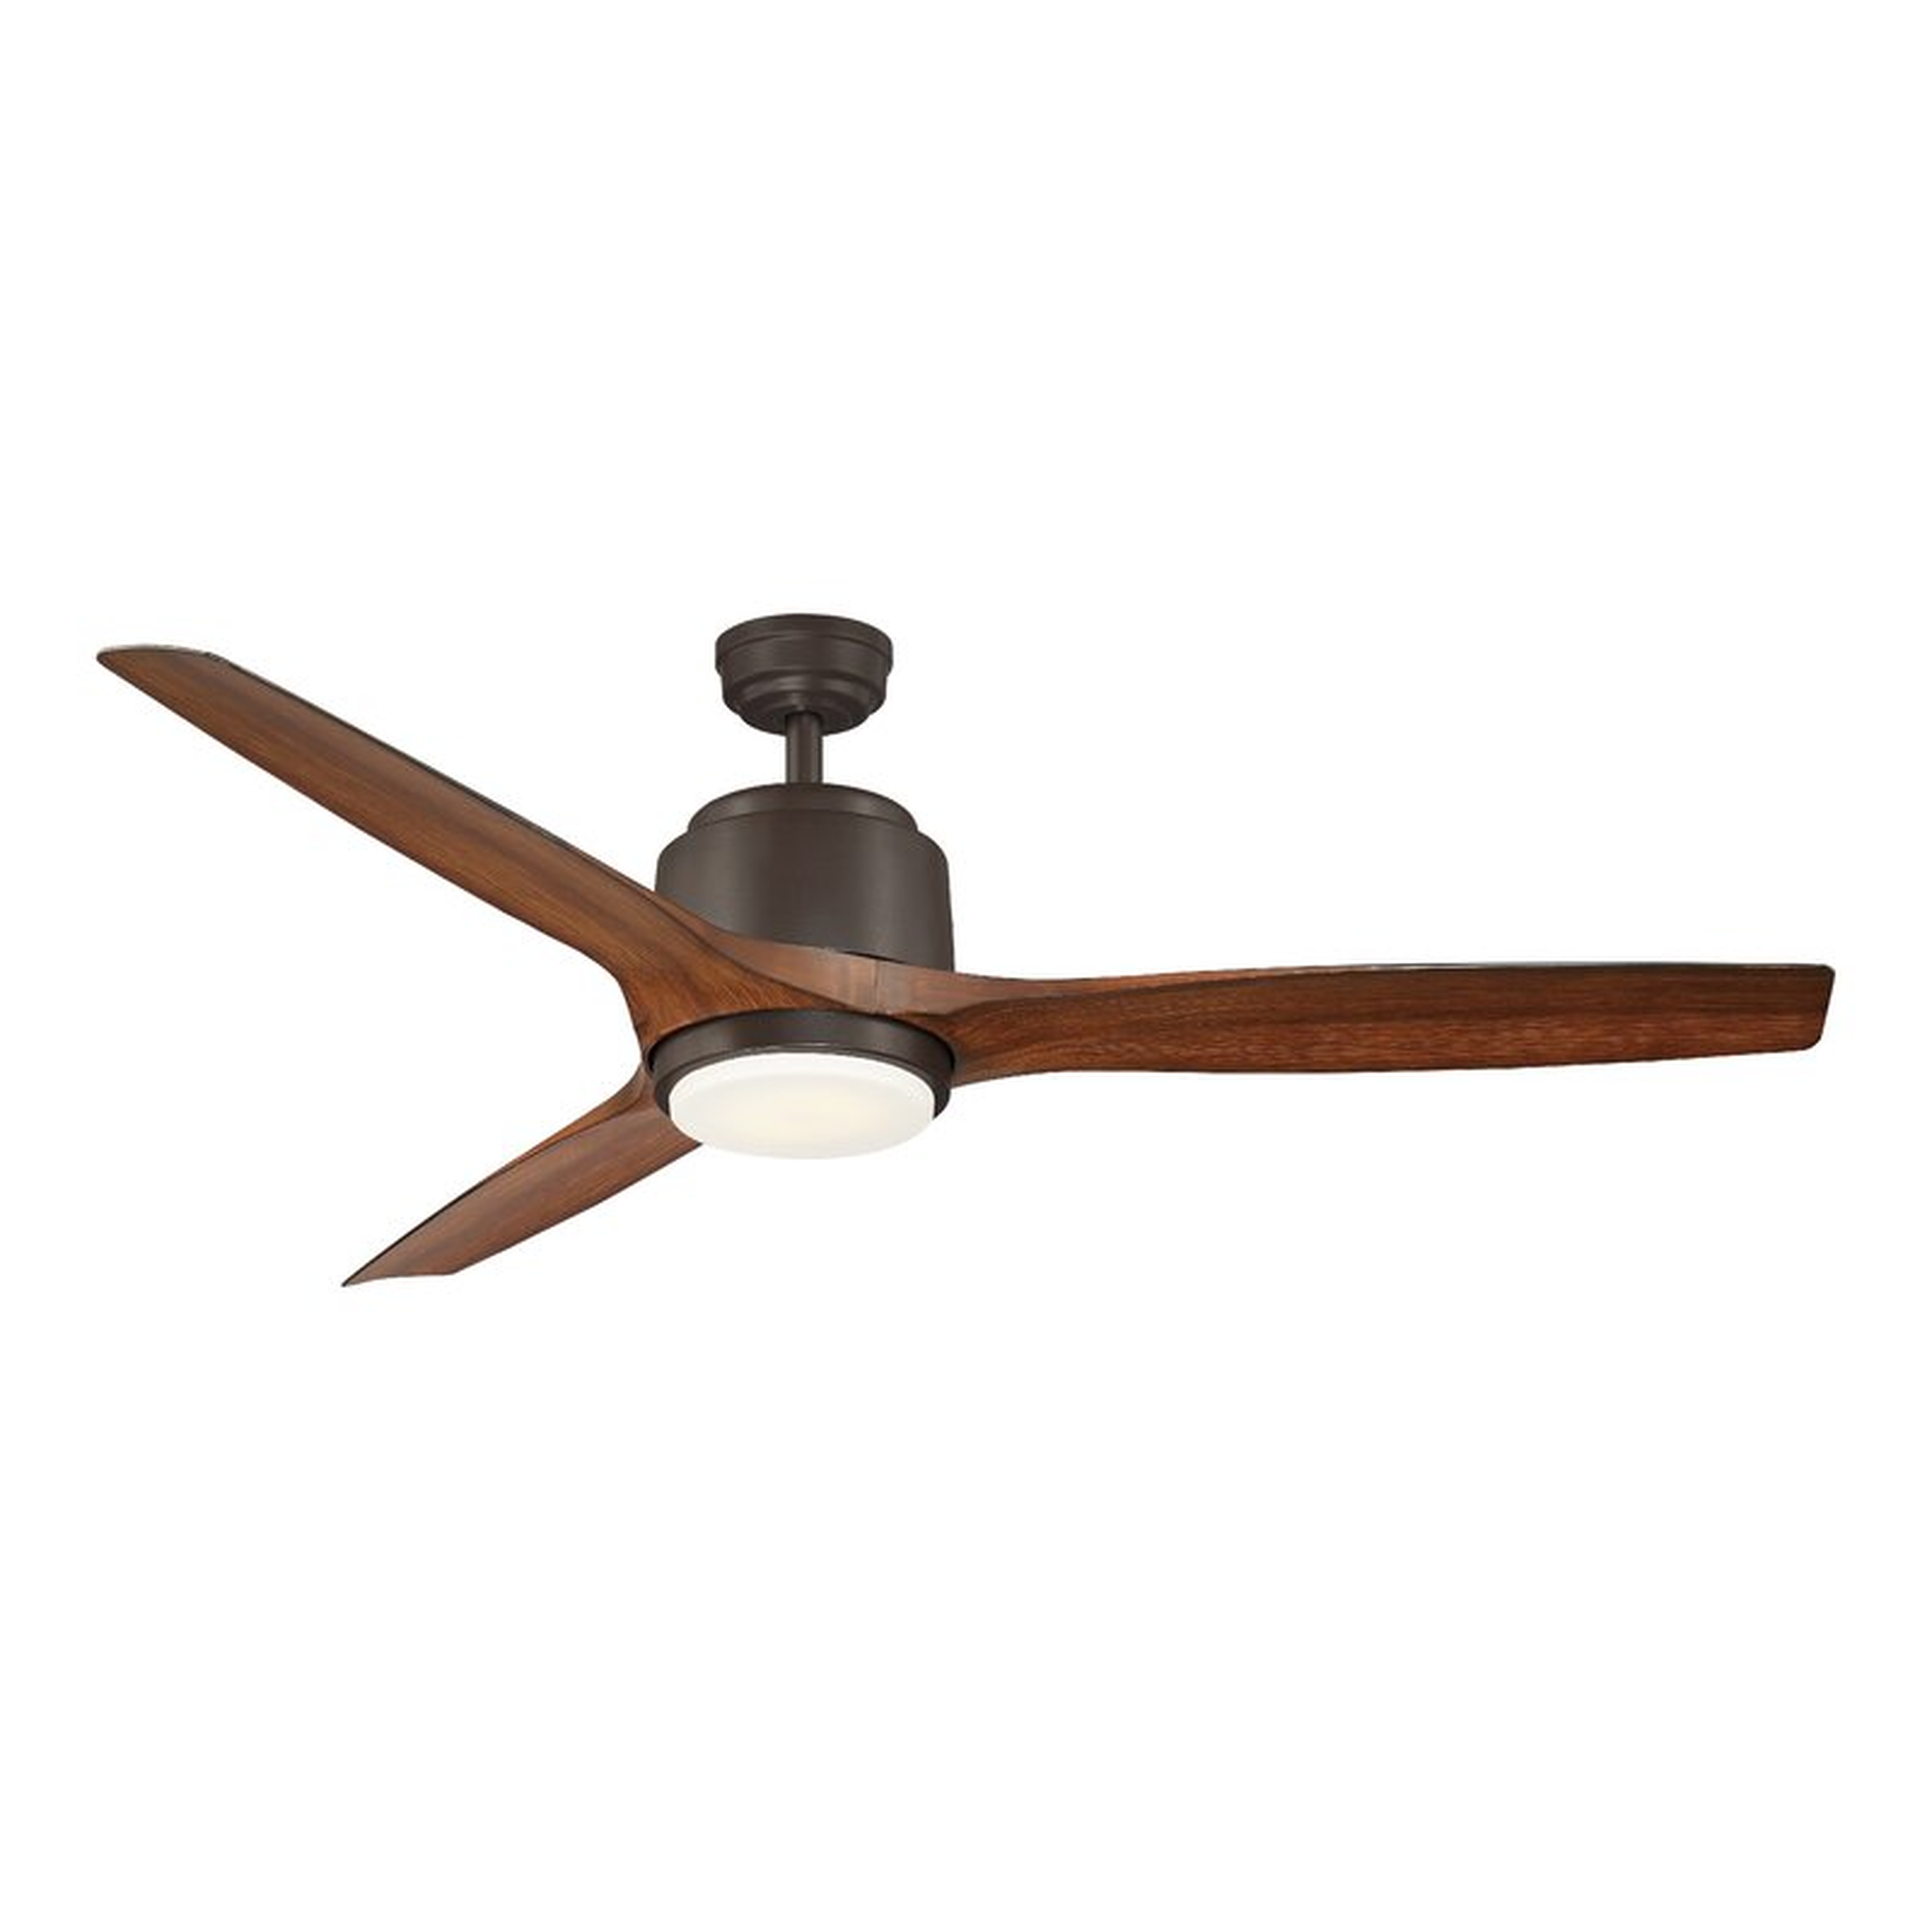 56" Whiling 3 Blade Outdoor LED Ceiling Fan with Remote, Light Kit Included, Brown - Wayfair